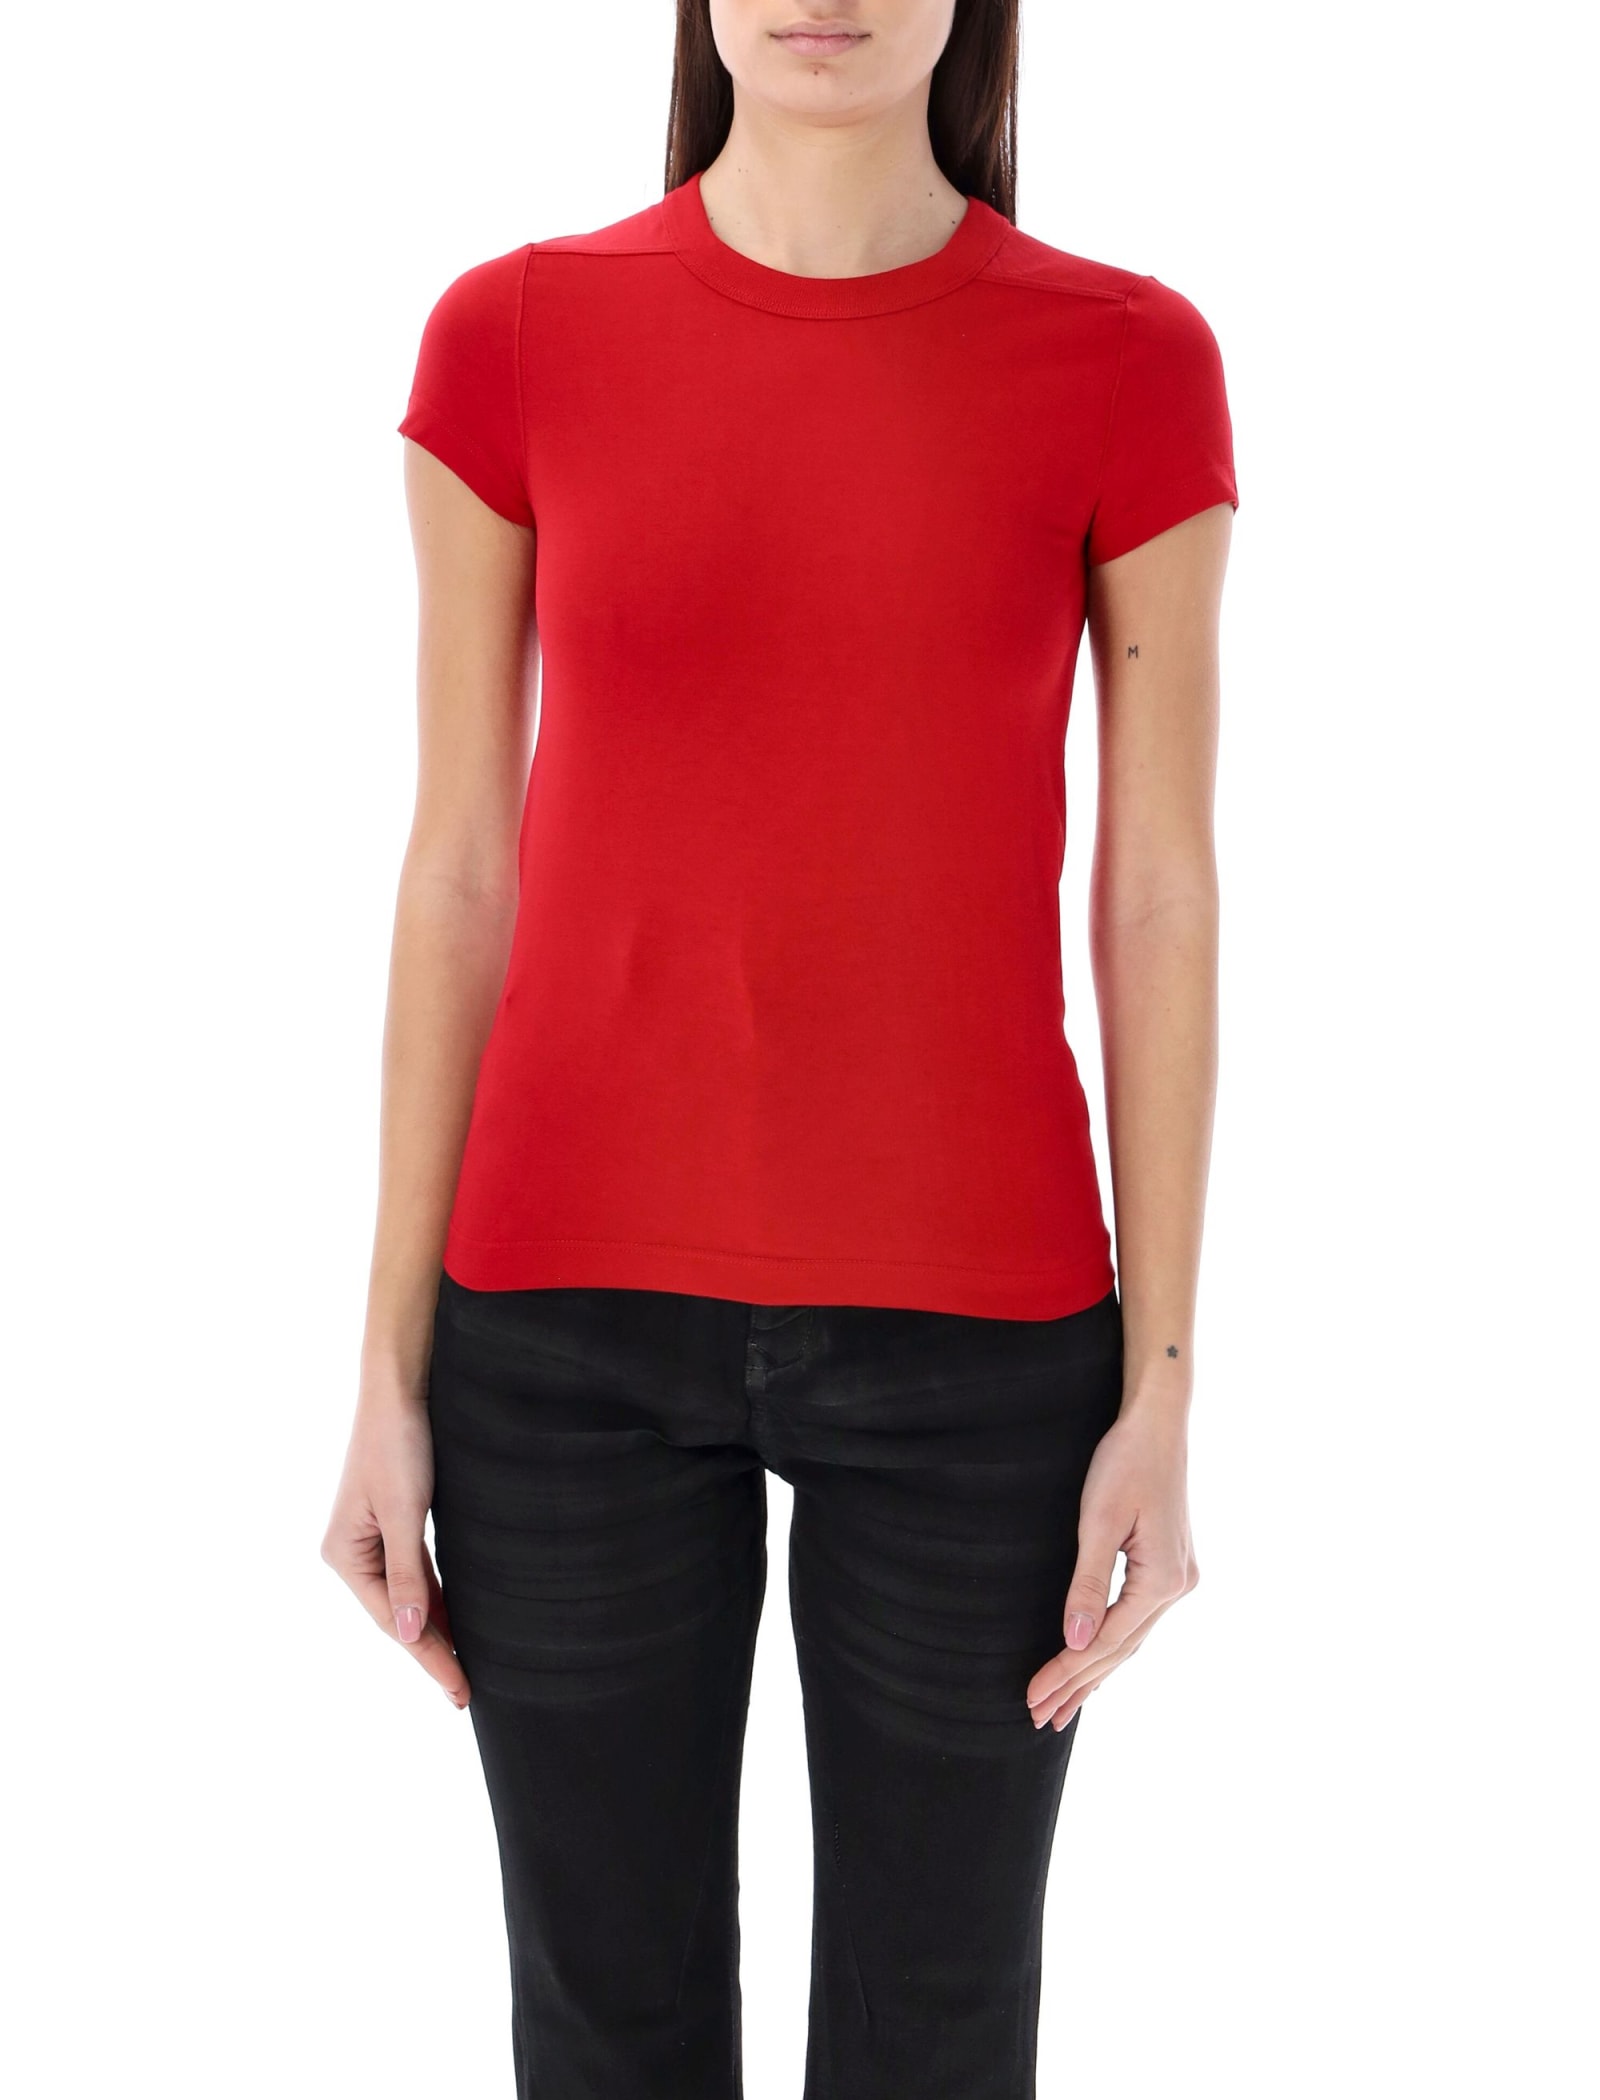 Rick Owens Cropped Level T In Cardinal